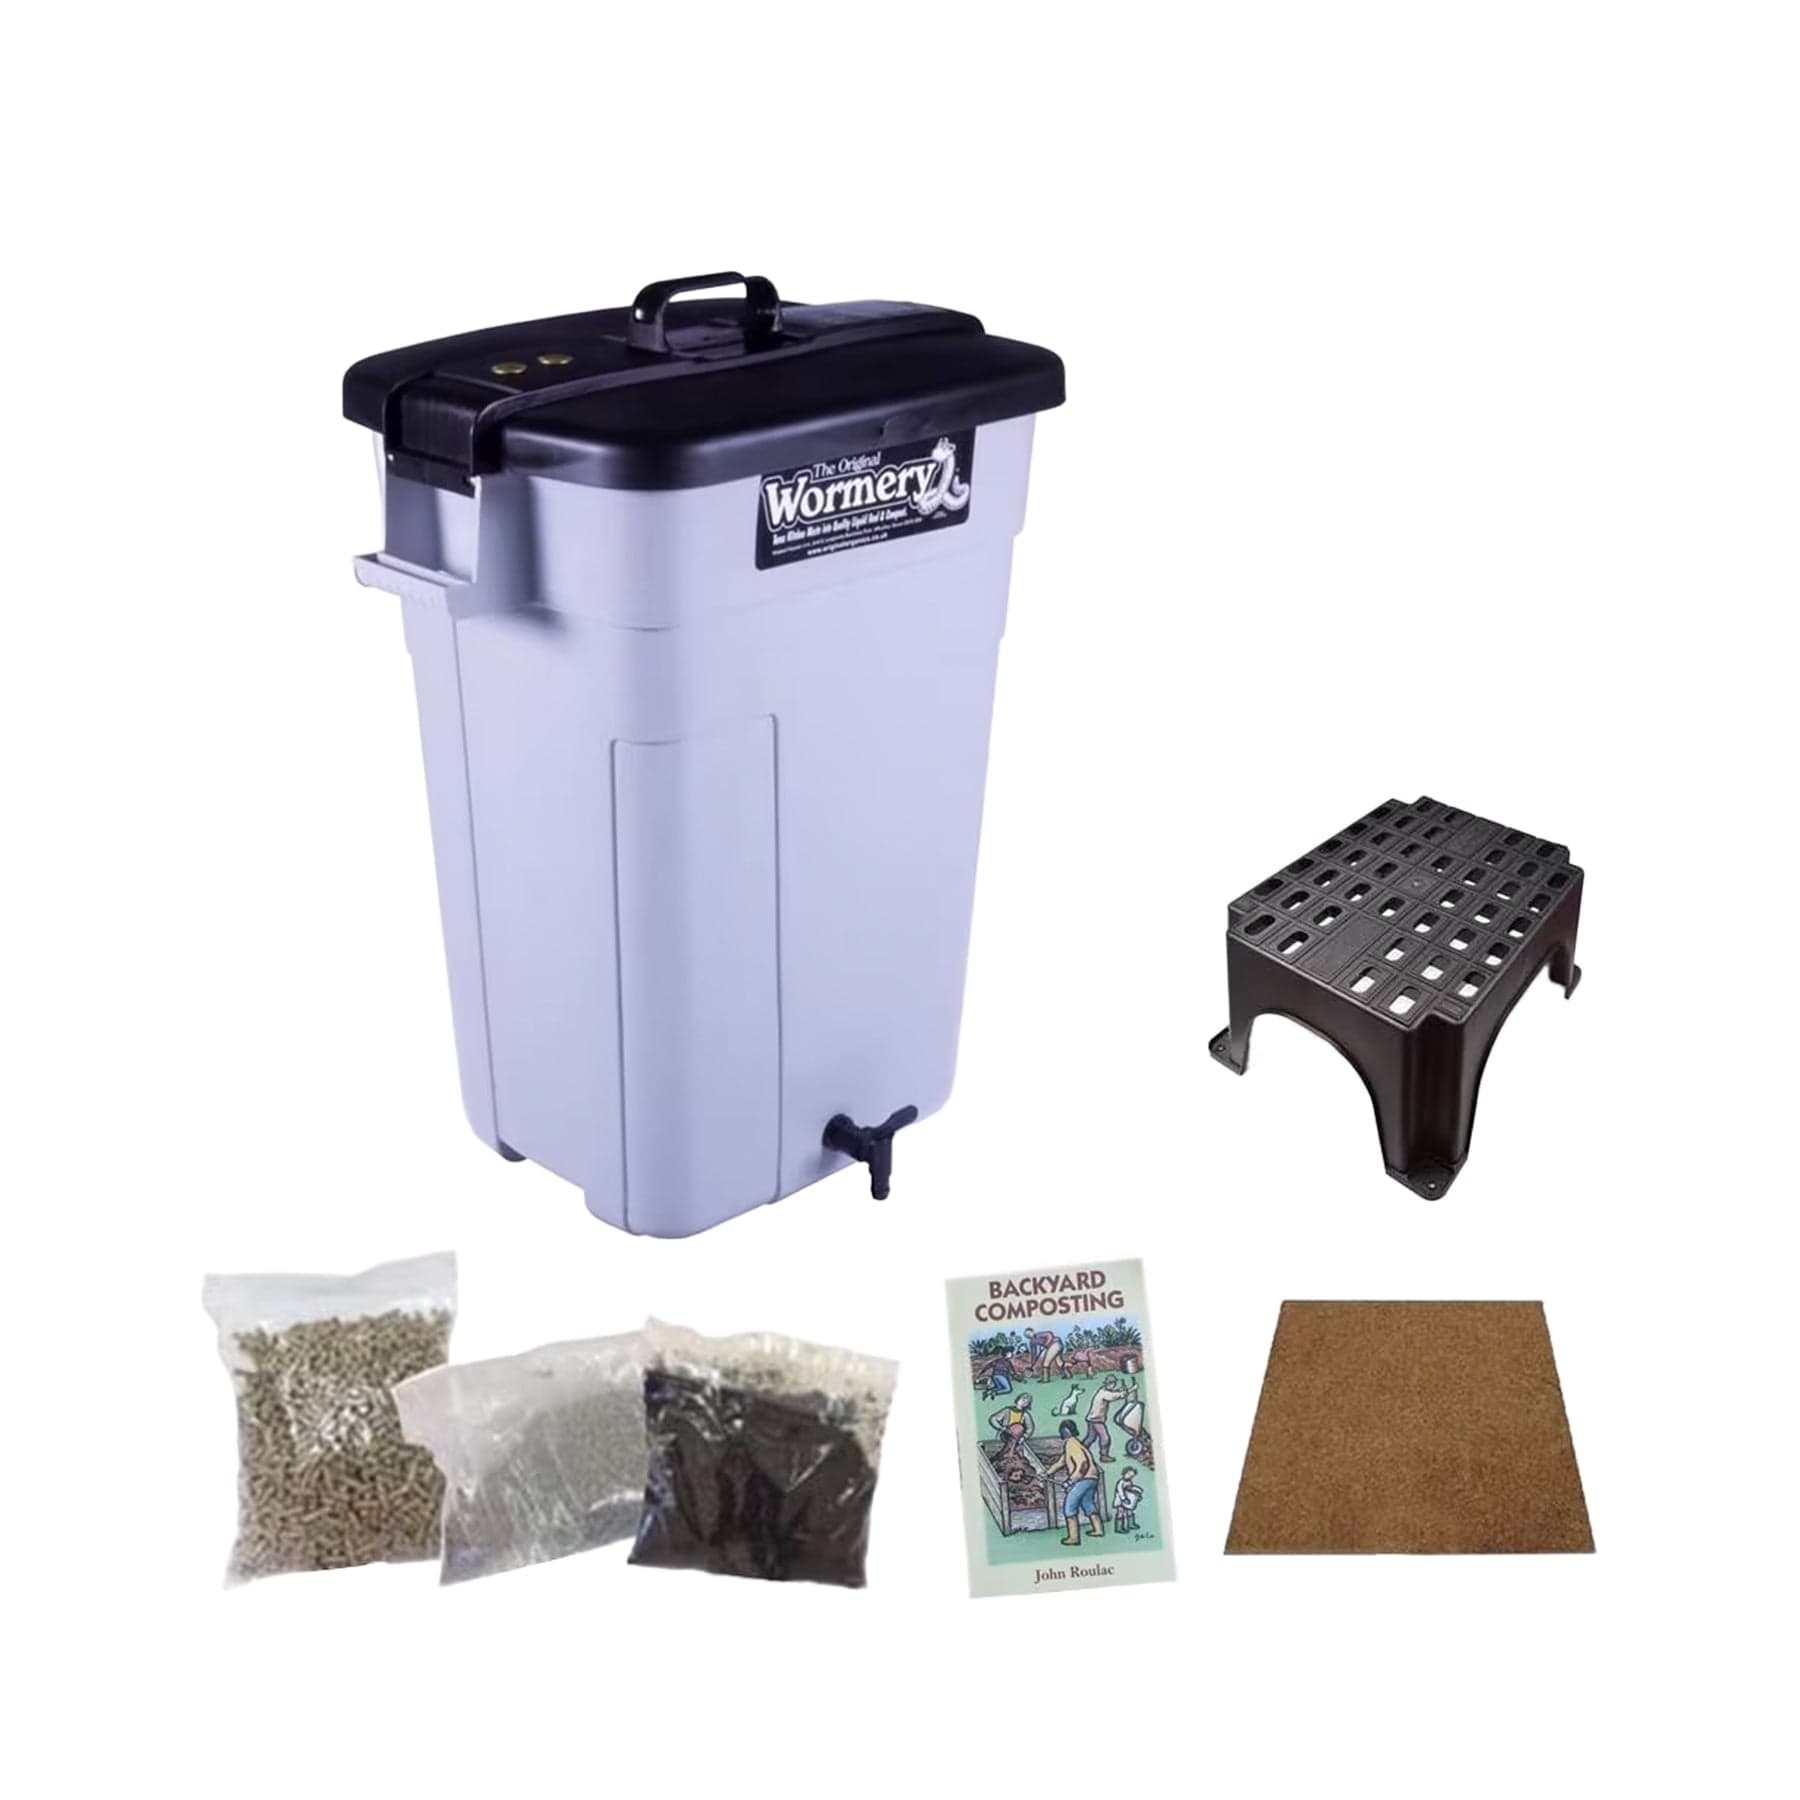 The deluxe original wormery composter kit